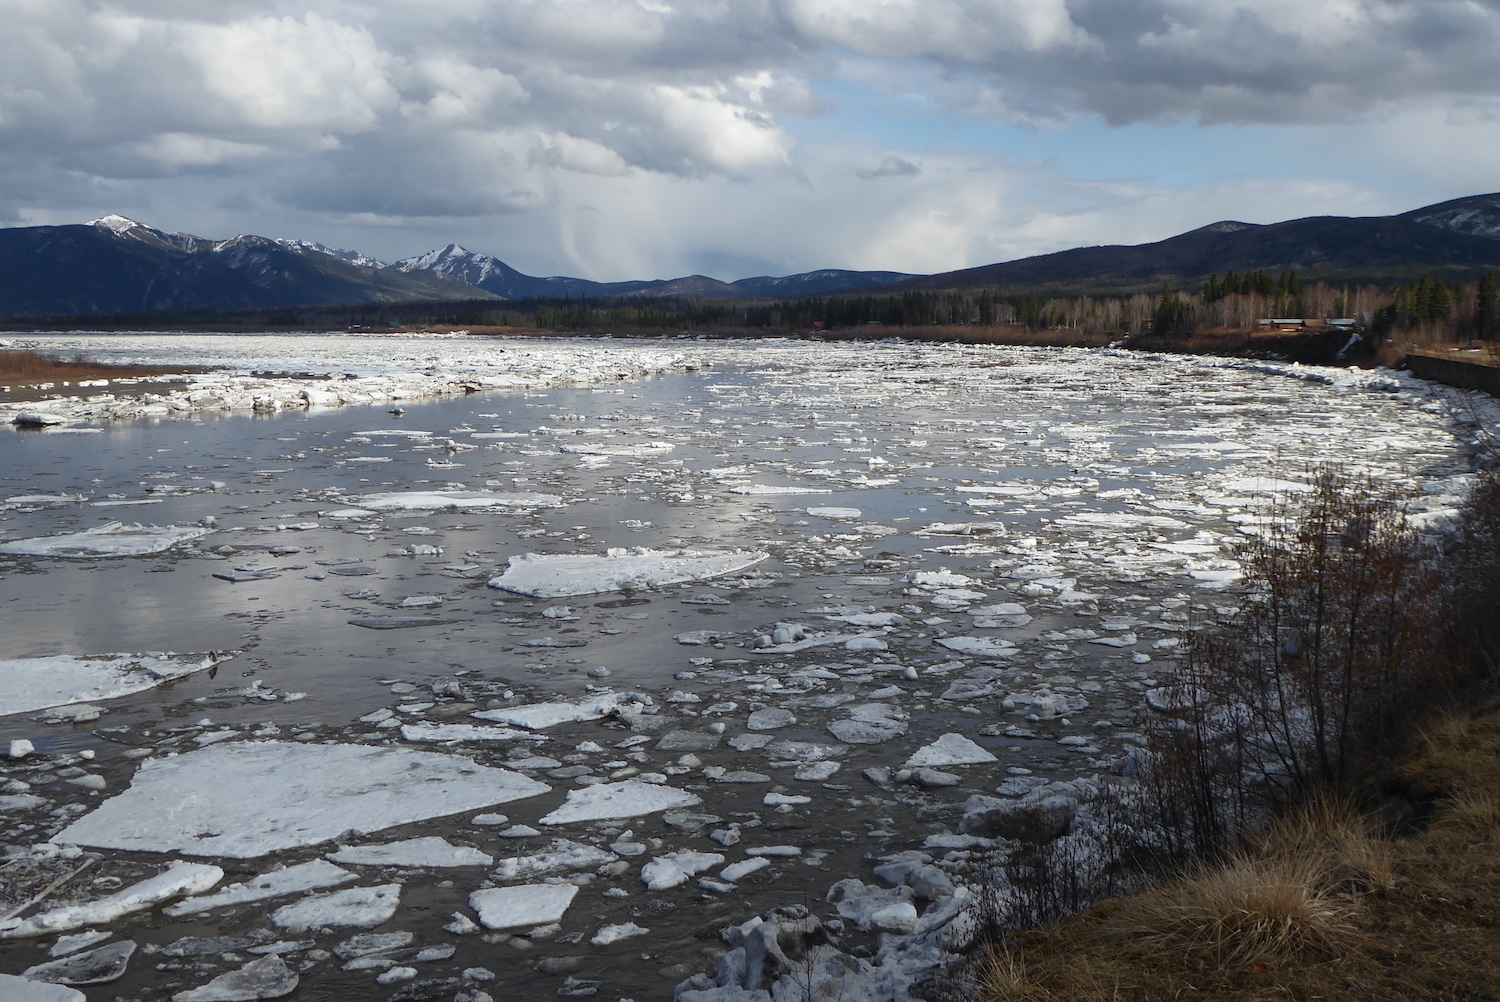 Ice chunks float on a river with mountains in the background.